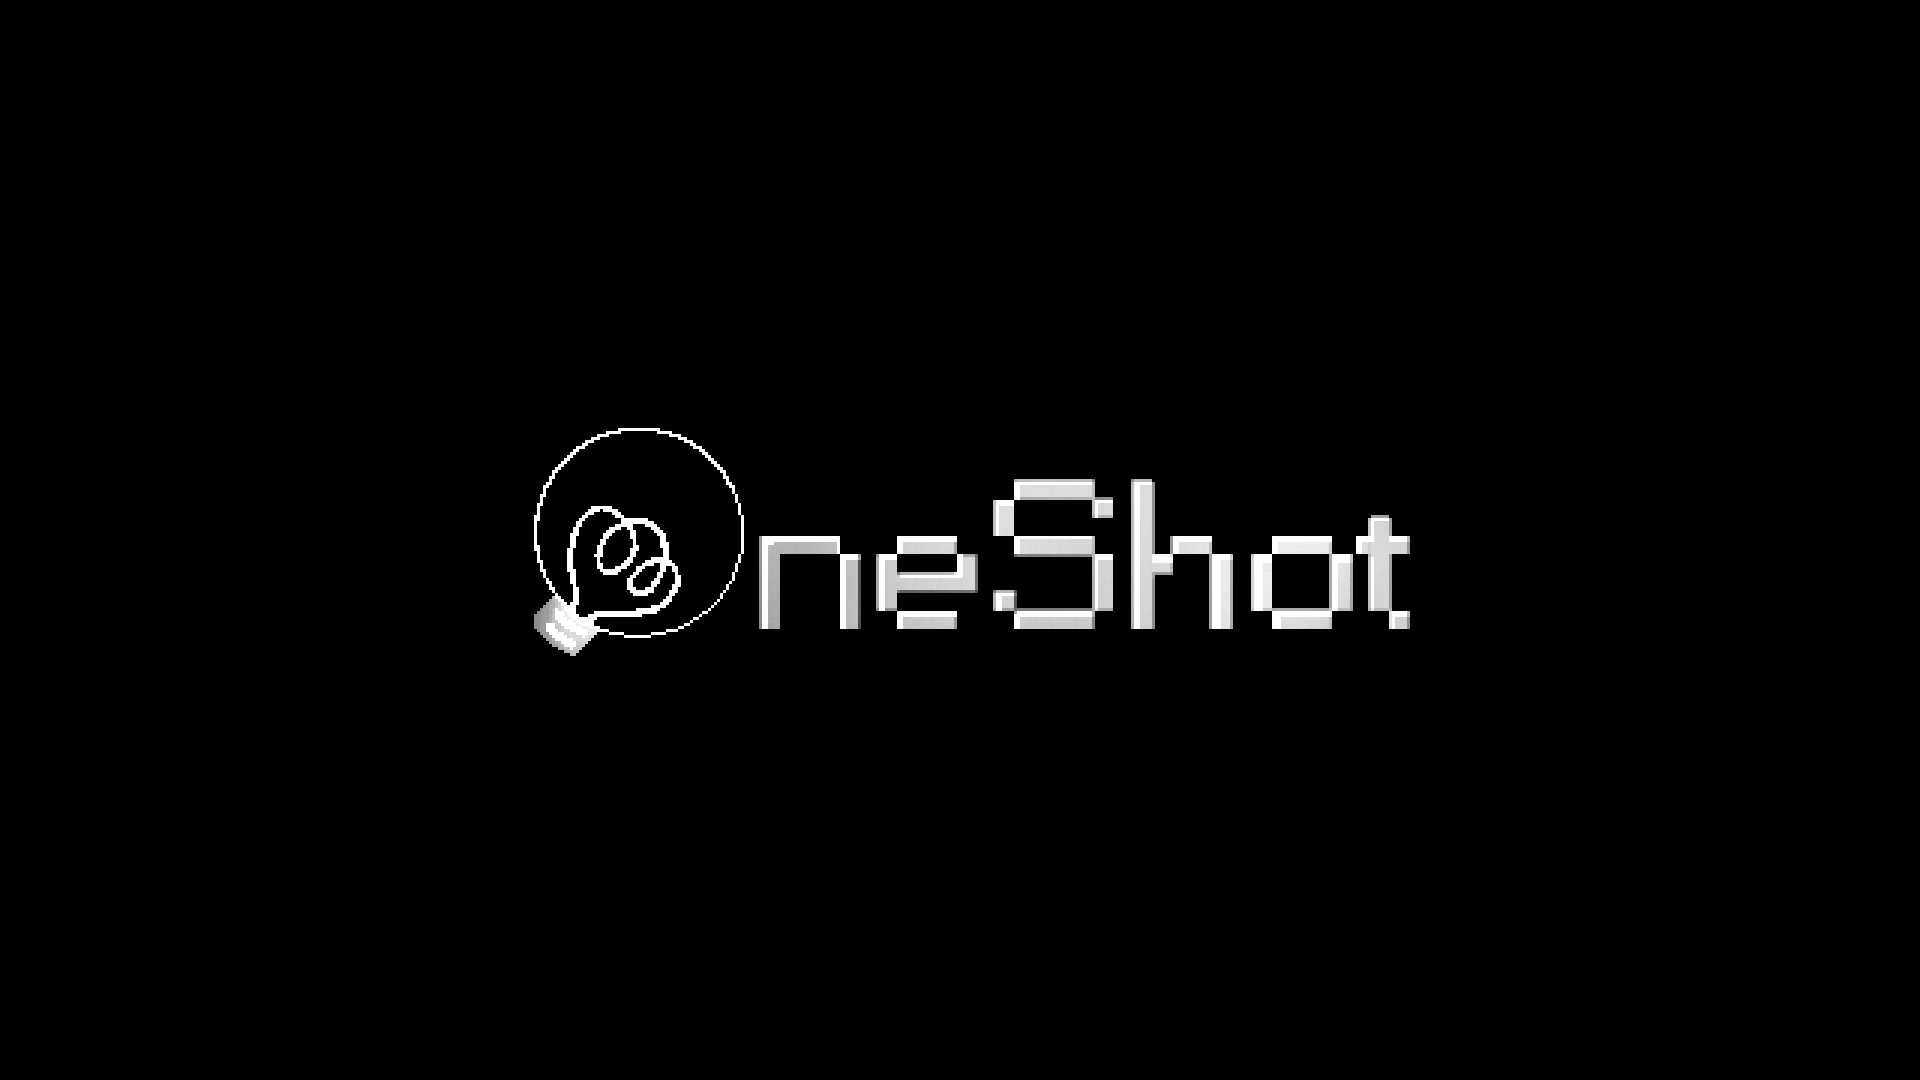 OneShot Wallpaper made from art from the game